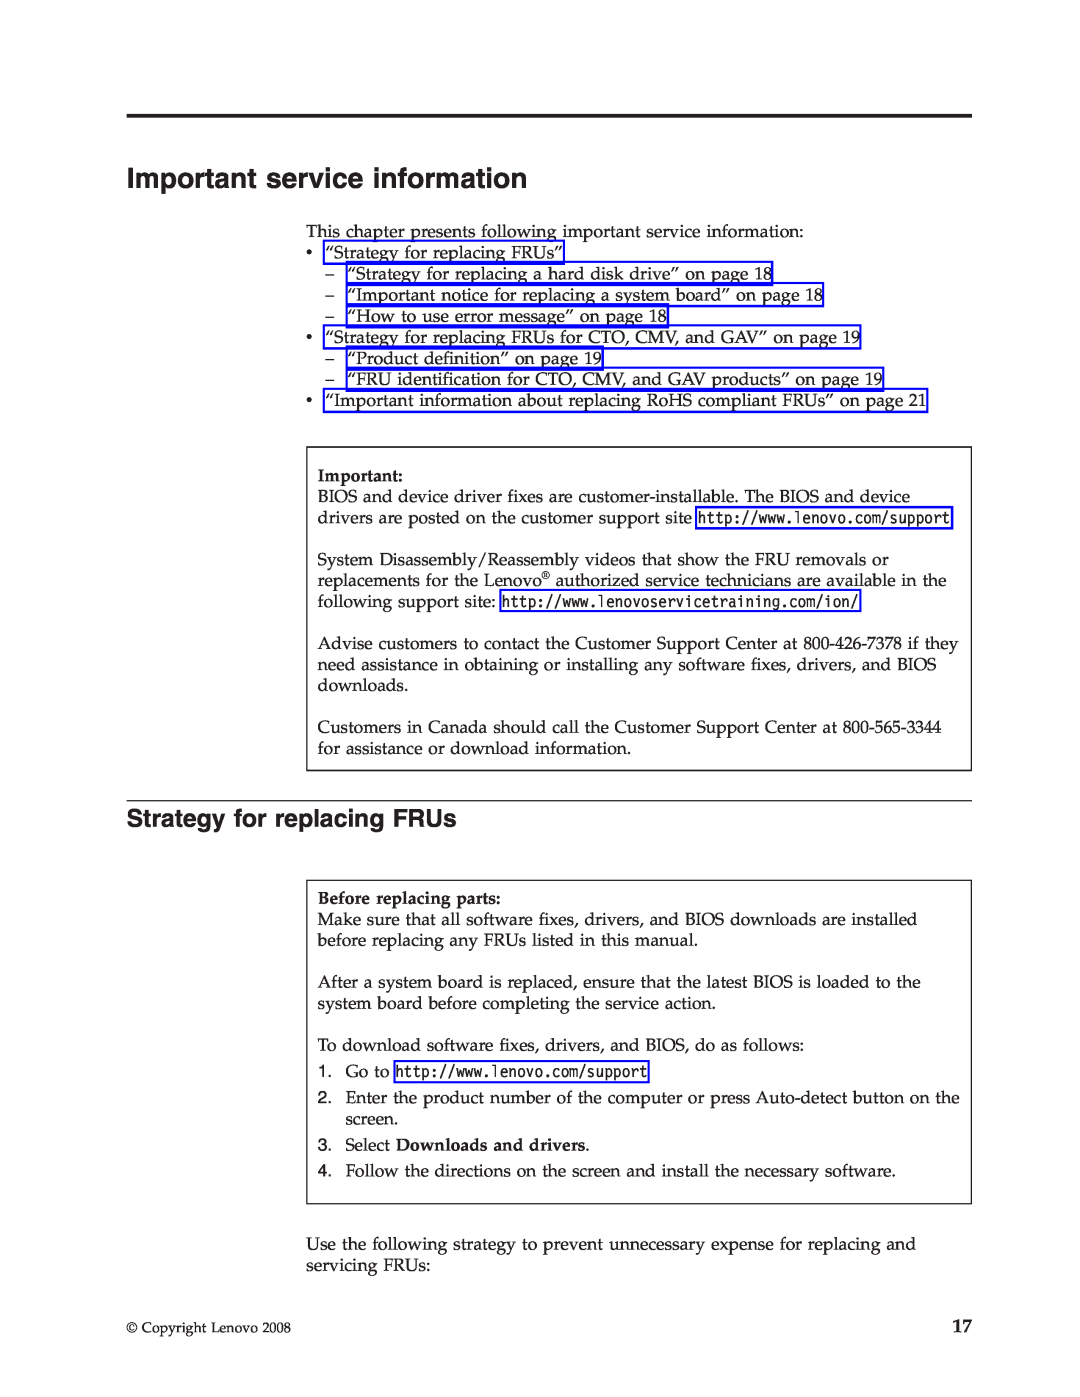 Lenovo X200 manual Important service information, Strategy for replacing FRUs, Before replacing parts 